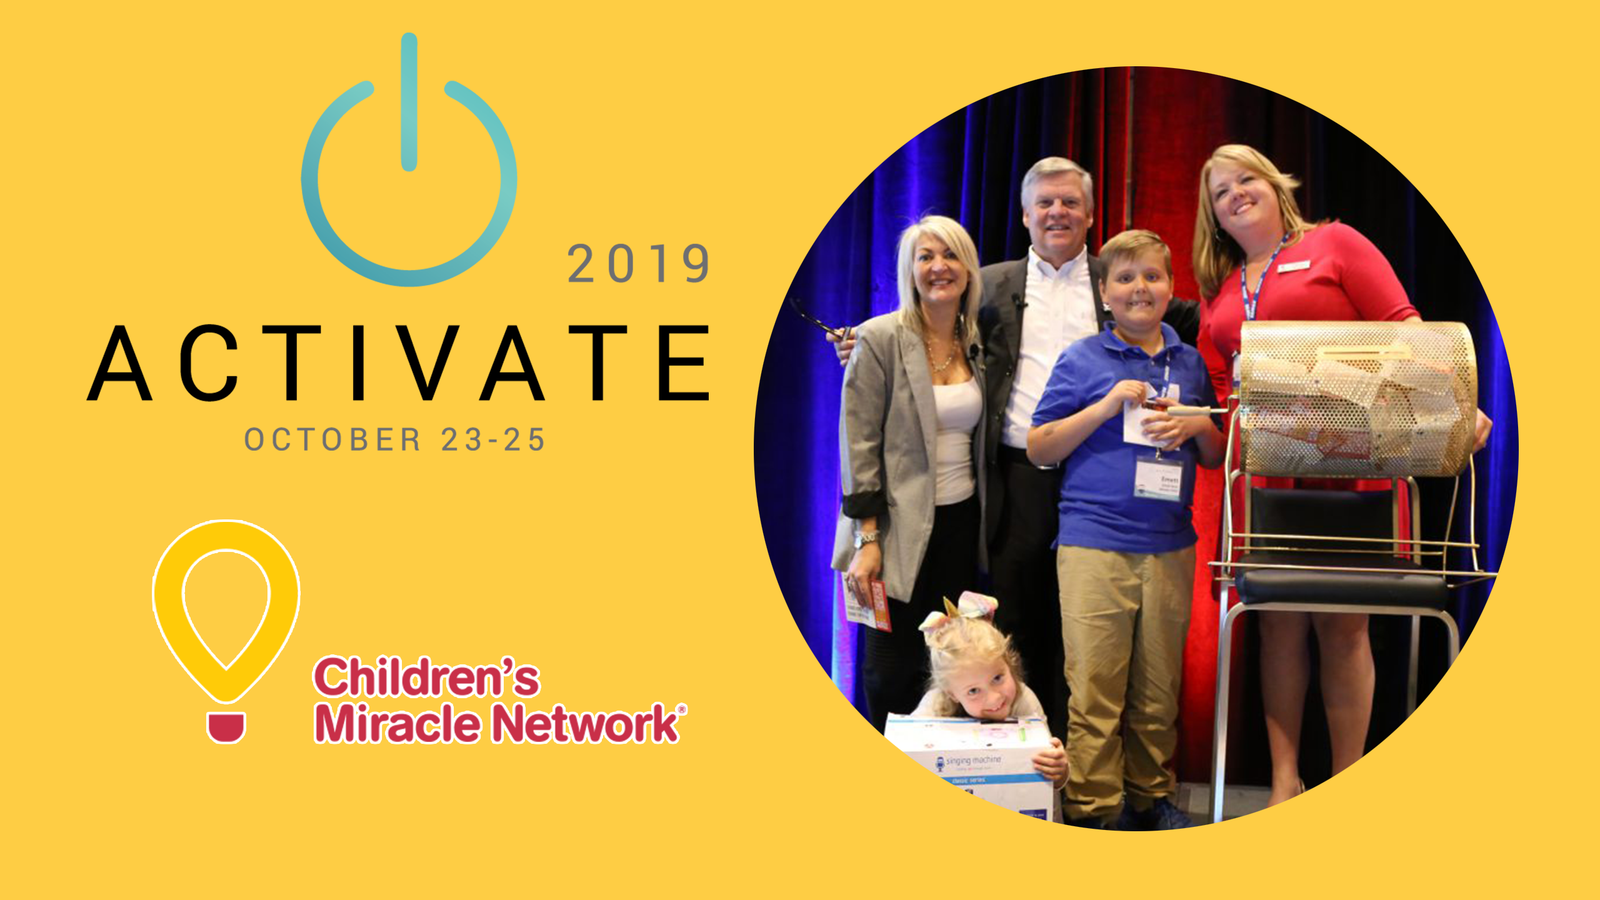 RE/MAX affiliates raised $100,000 for Children’s Miracle Network during Activate 2019 Conference